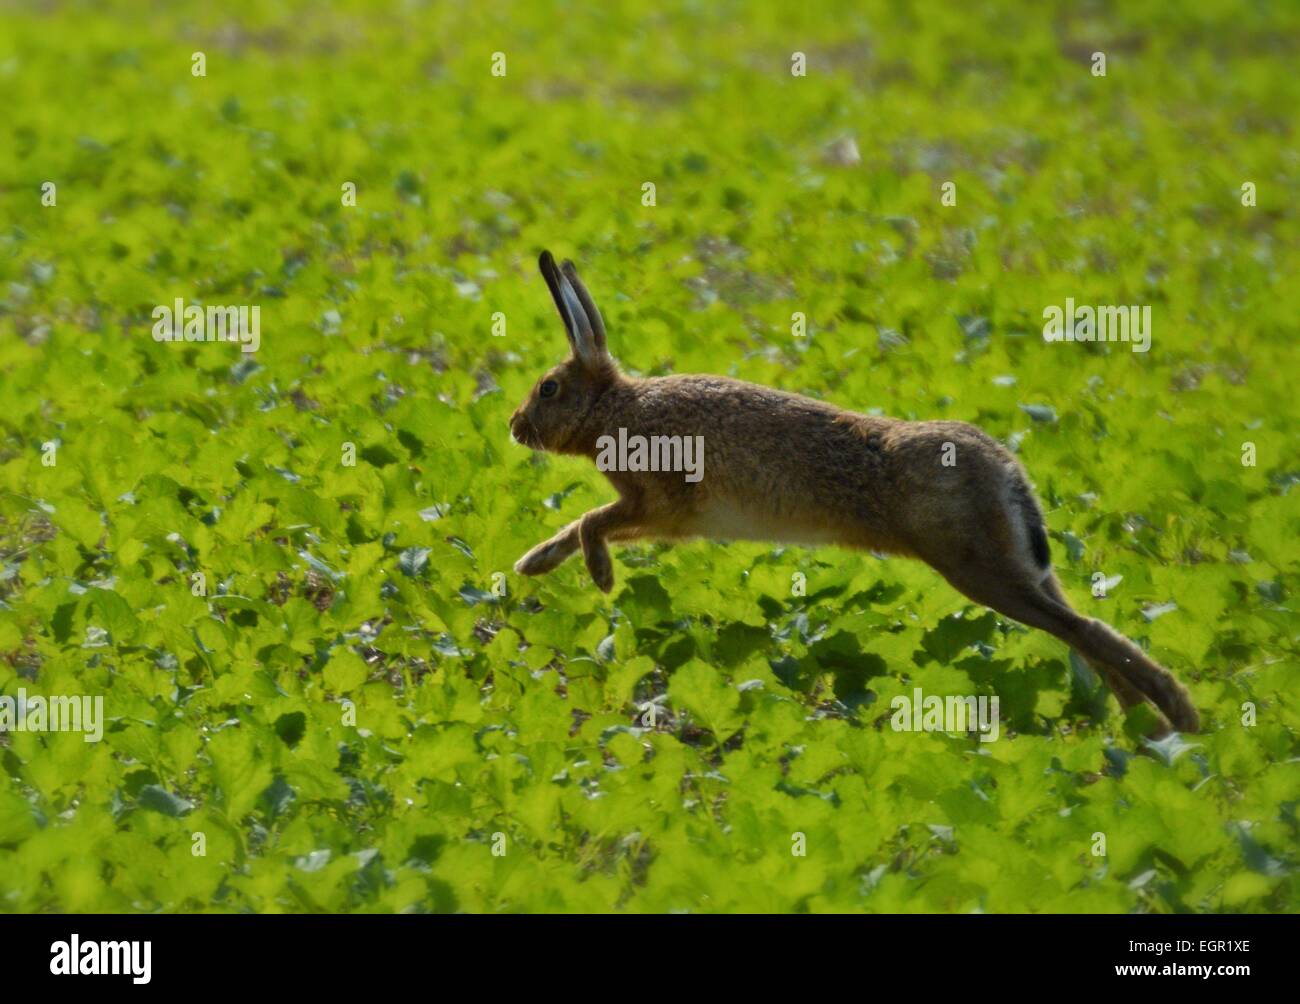 Hopping Hare in full color, Stock Photo